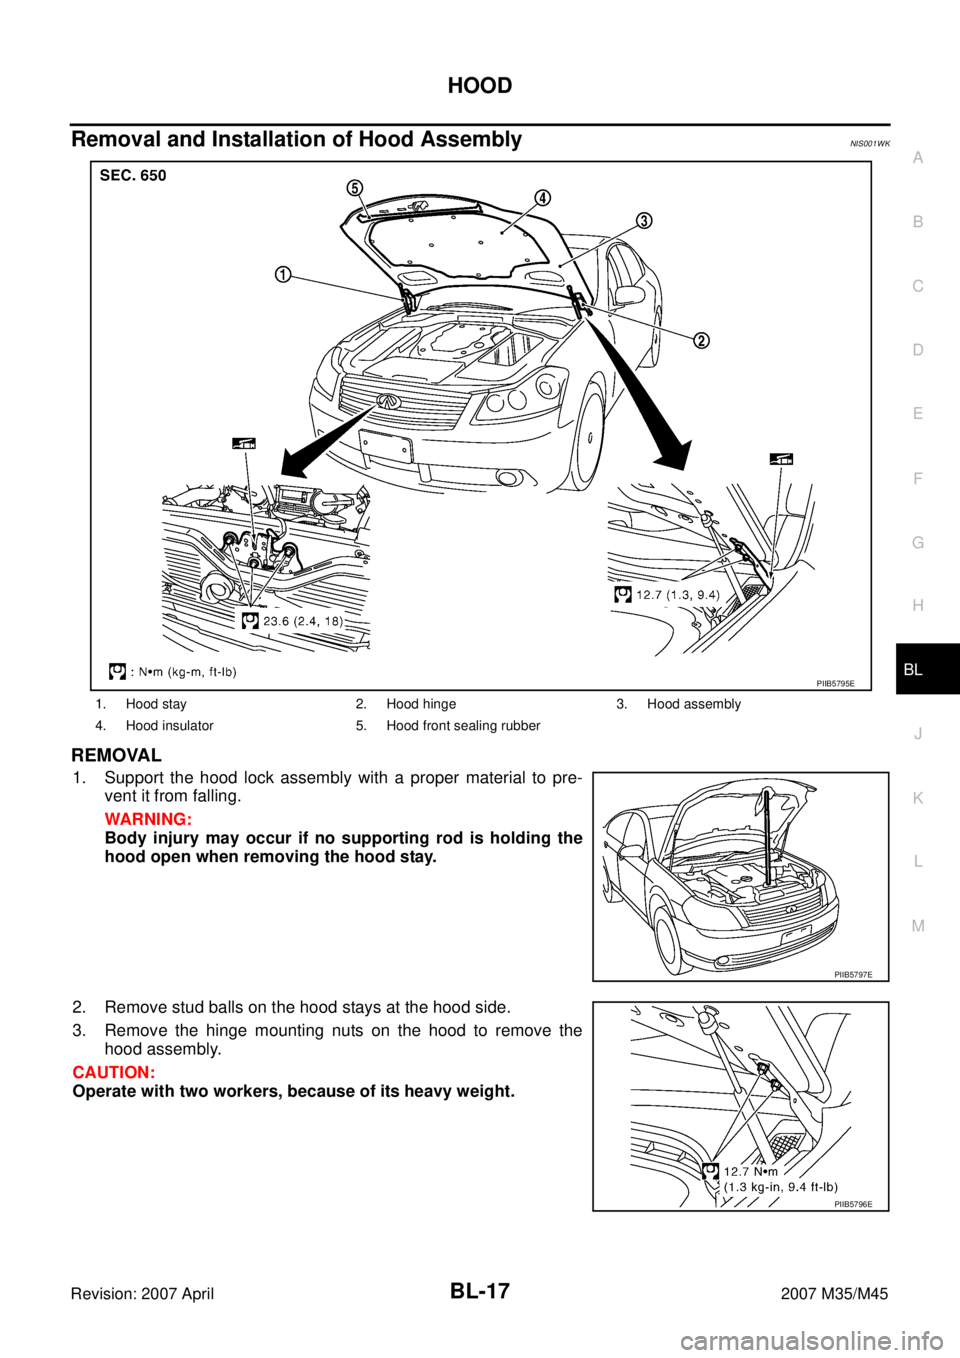 INFINITI M35 2007  Factory Service Manual HOOD
BL-17
C
D
E
F
G
H
J
K
L
MA
B
BL
Revision: 2007 April2007 M35/M45
Removal and Installation of Hood AssemblyNIS001WK
REMOVAL
1. Support the hood lock assembly with a proper material to pre-
vent it